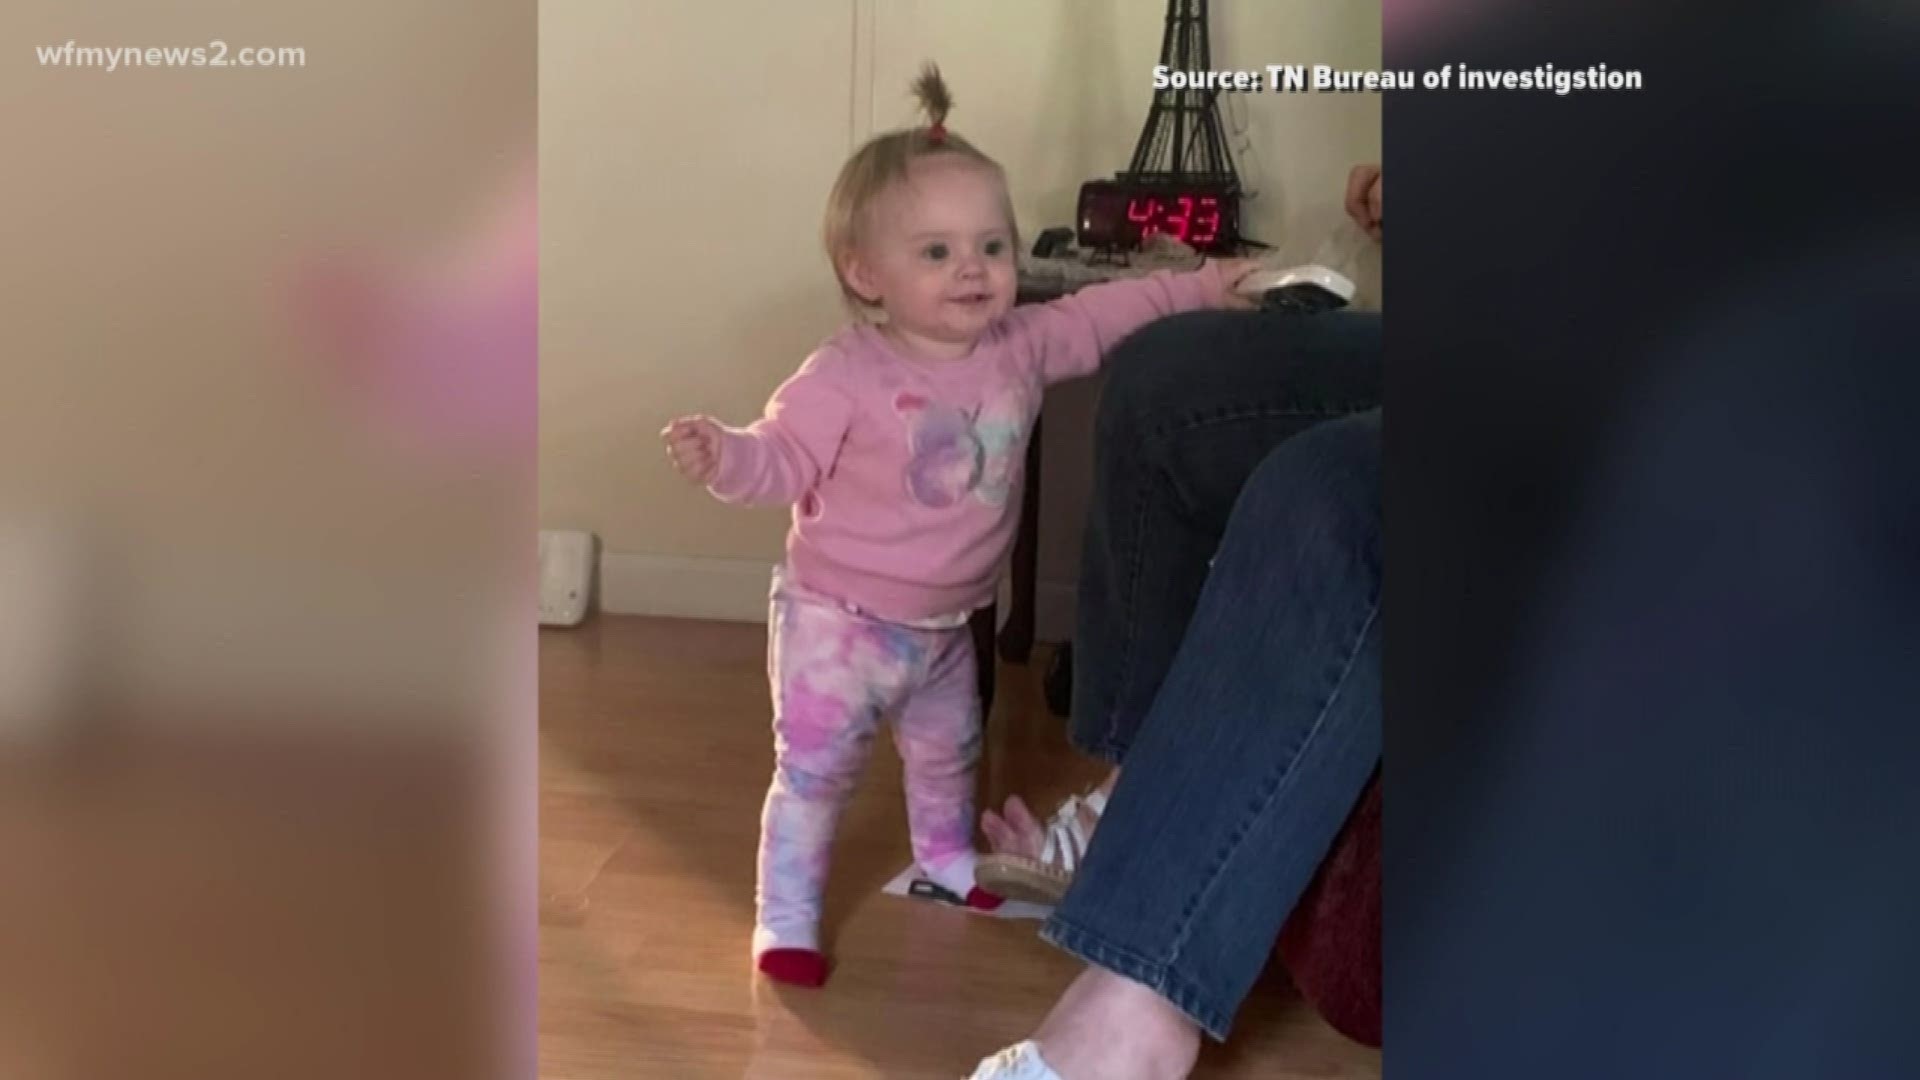 Sullivan County Sheriff's Office says investigators are "actively looking in an area in Wilkes County, North Carolina" in the case of missing 15-month-old.